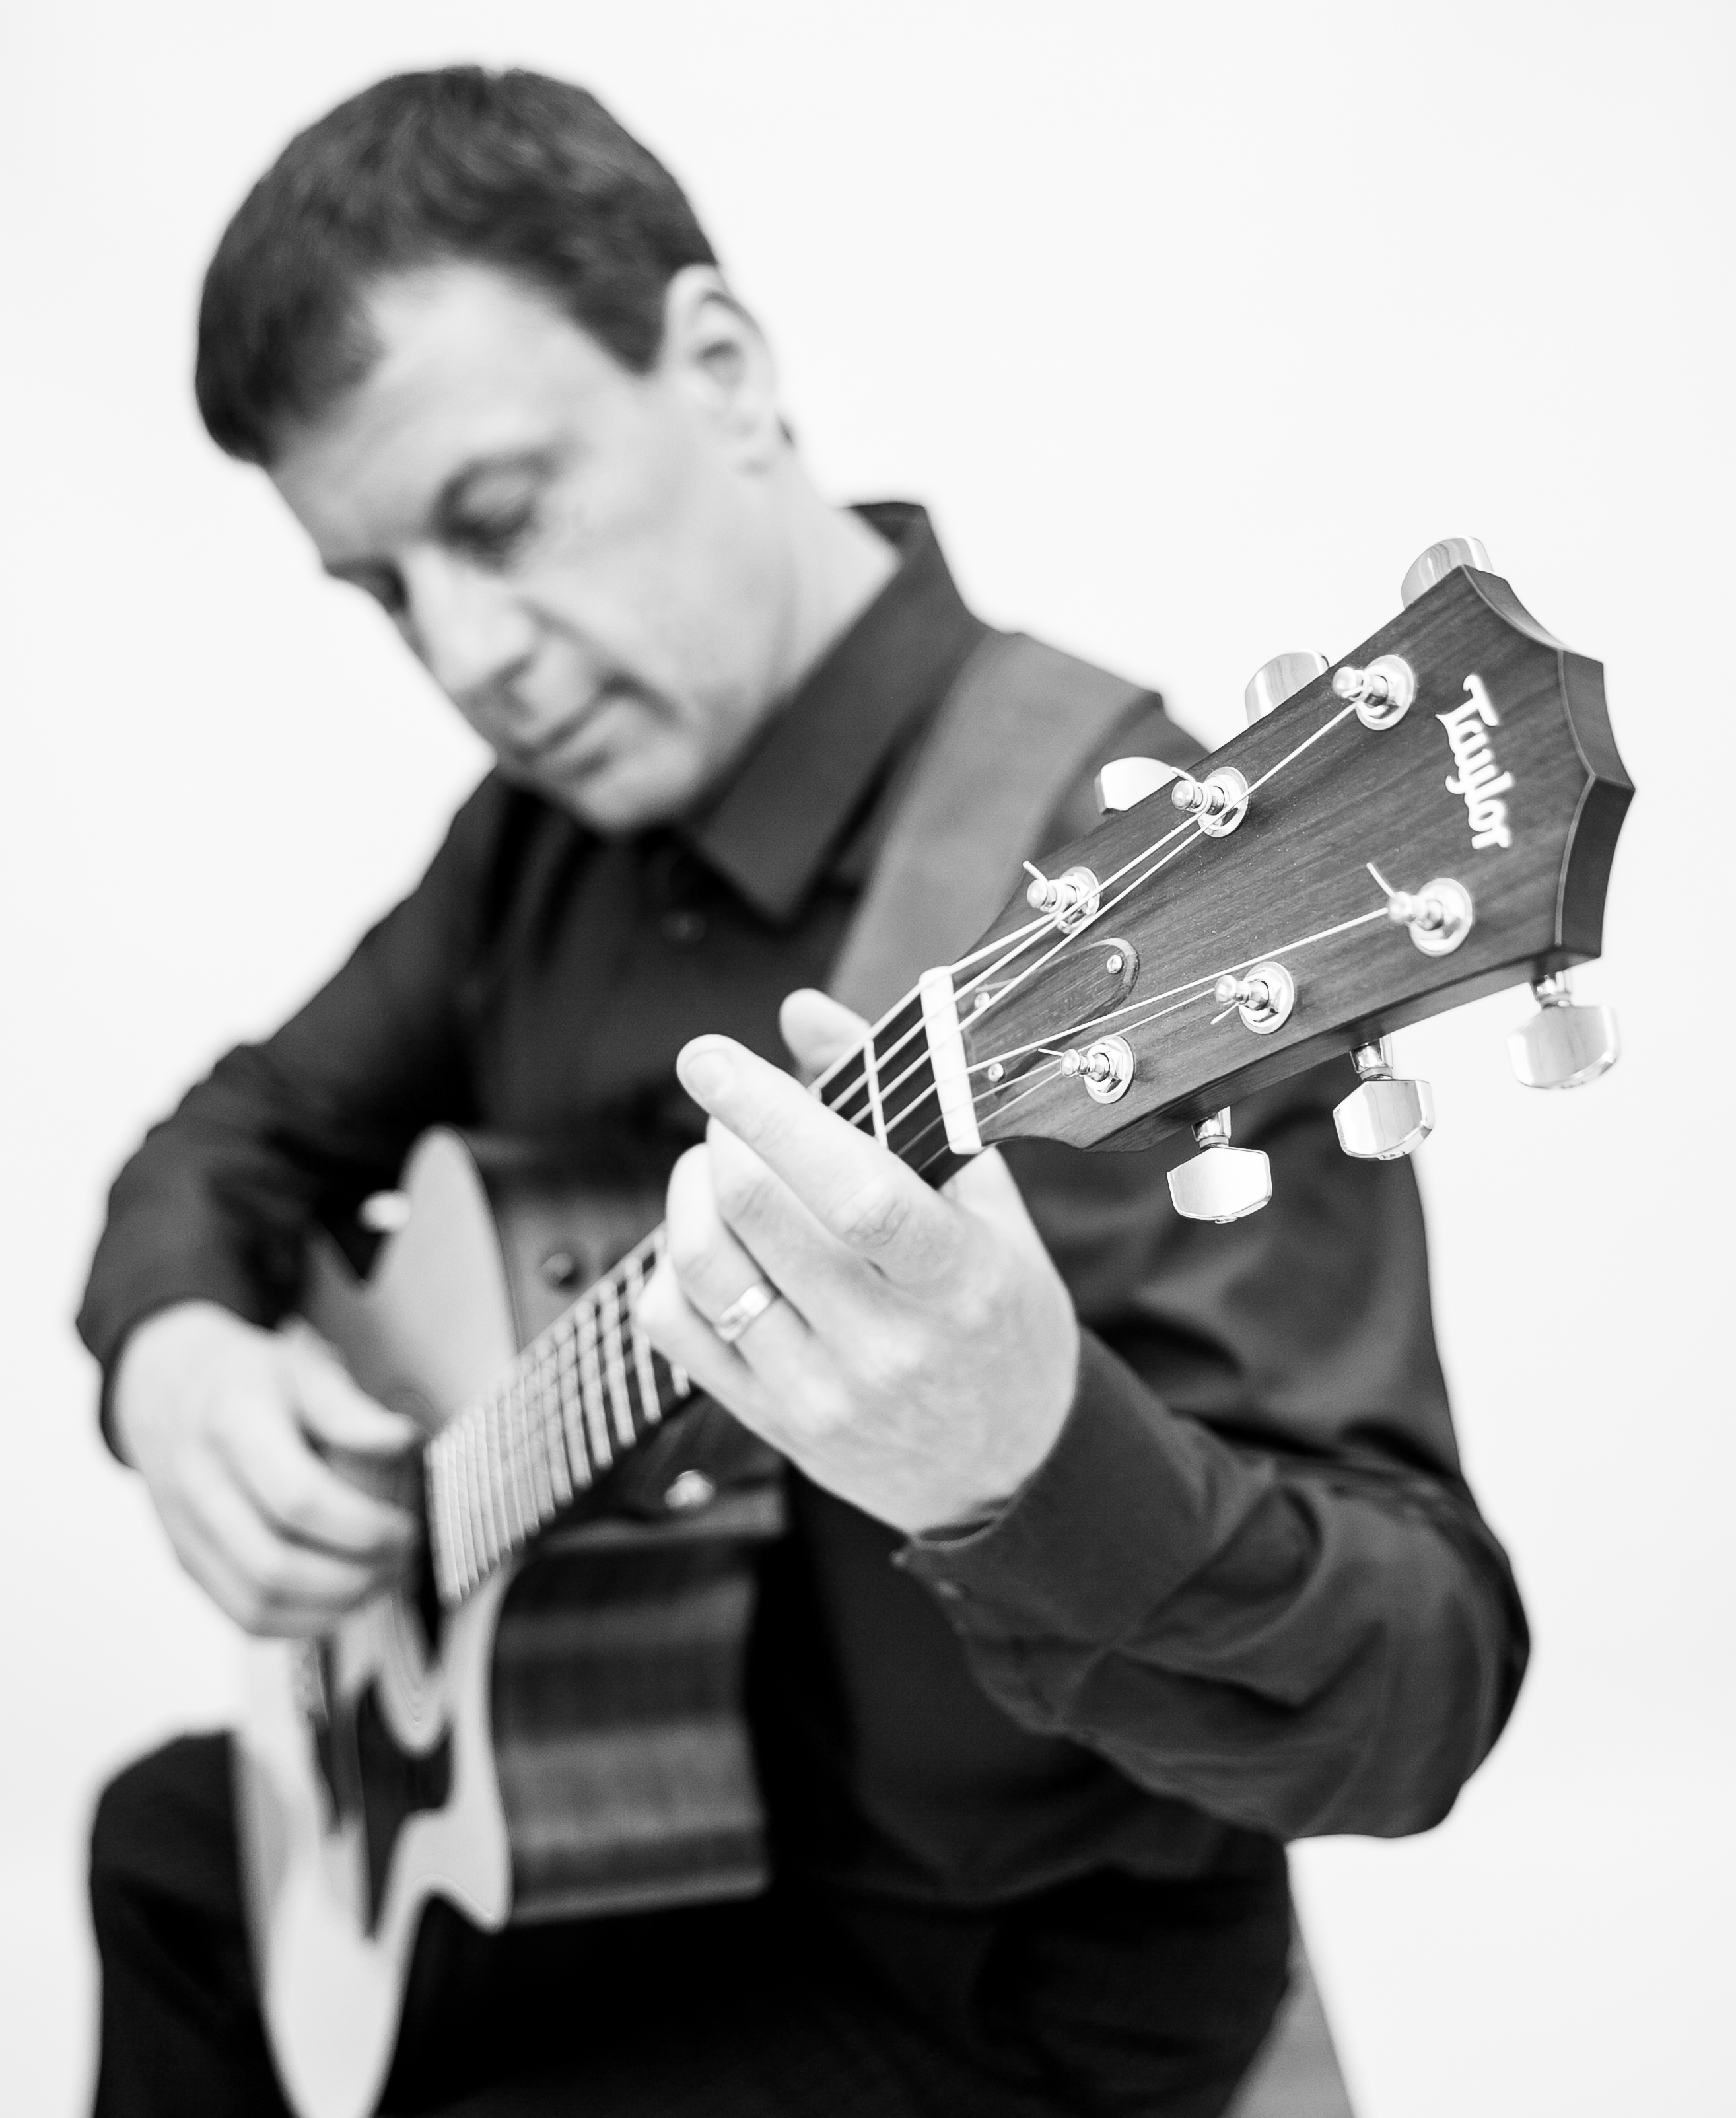 Norfolk Wedding Guitarist - music for weddings, parties and events.